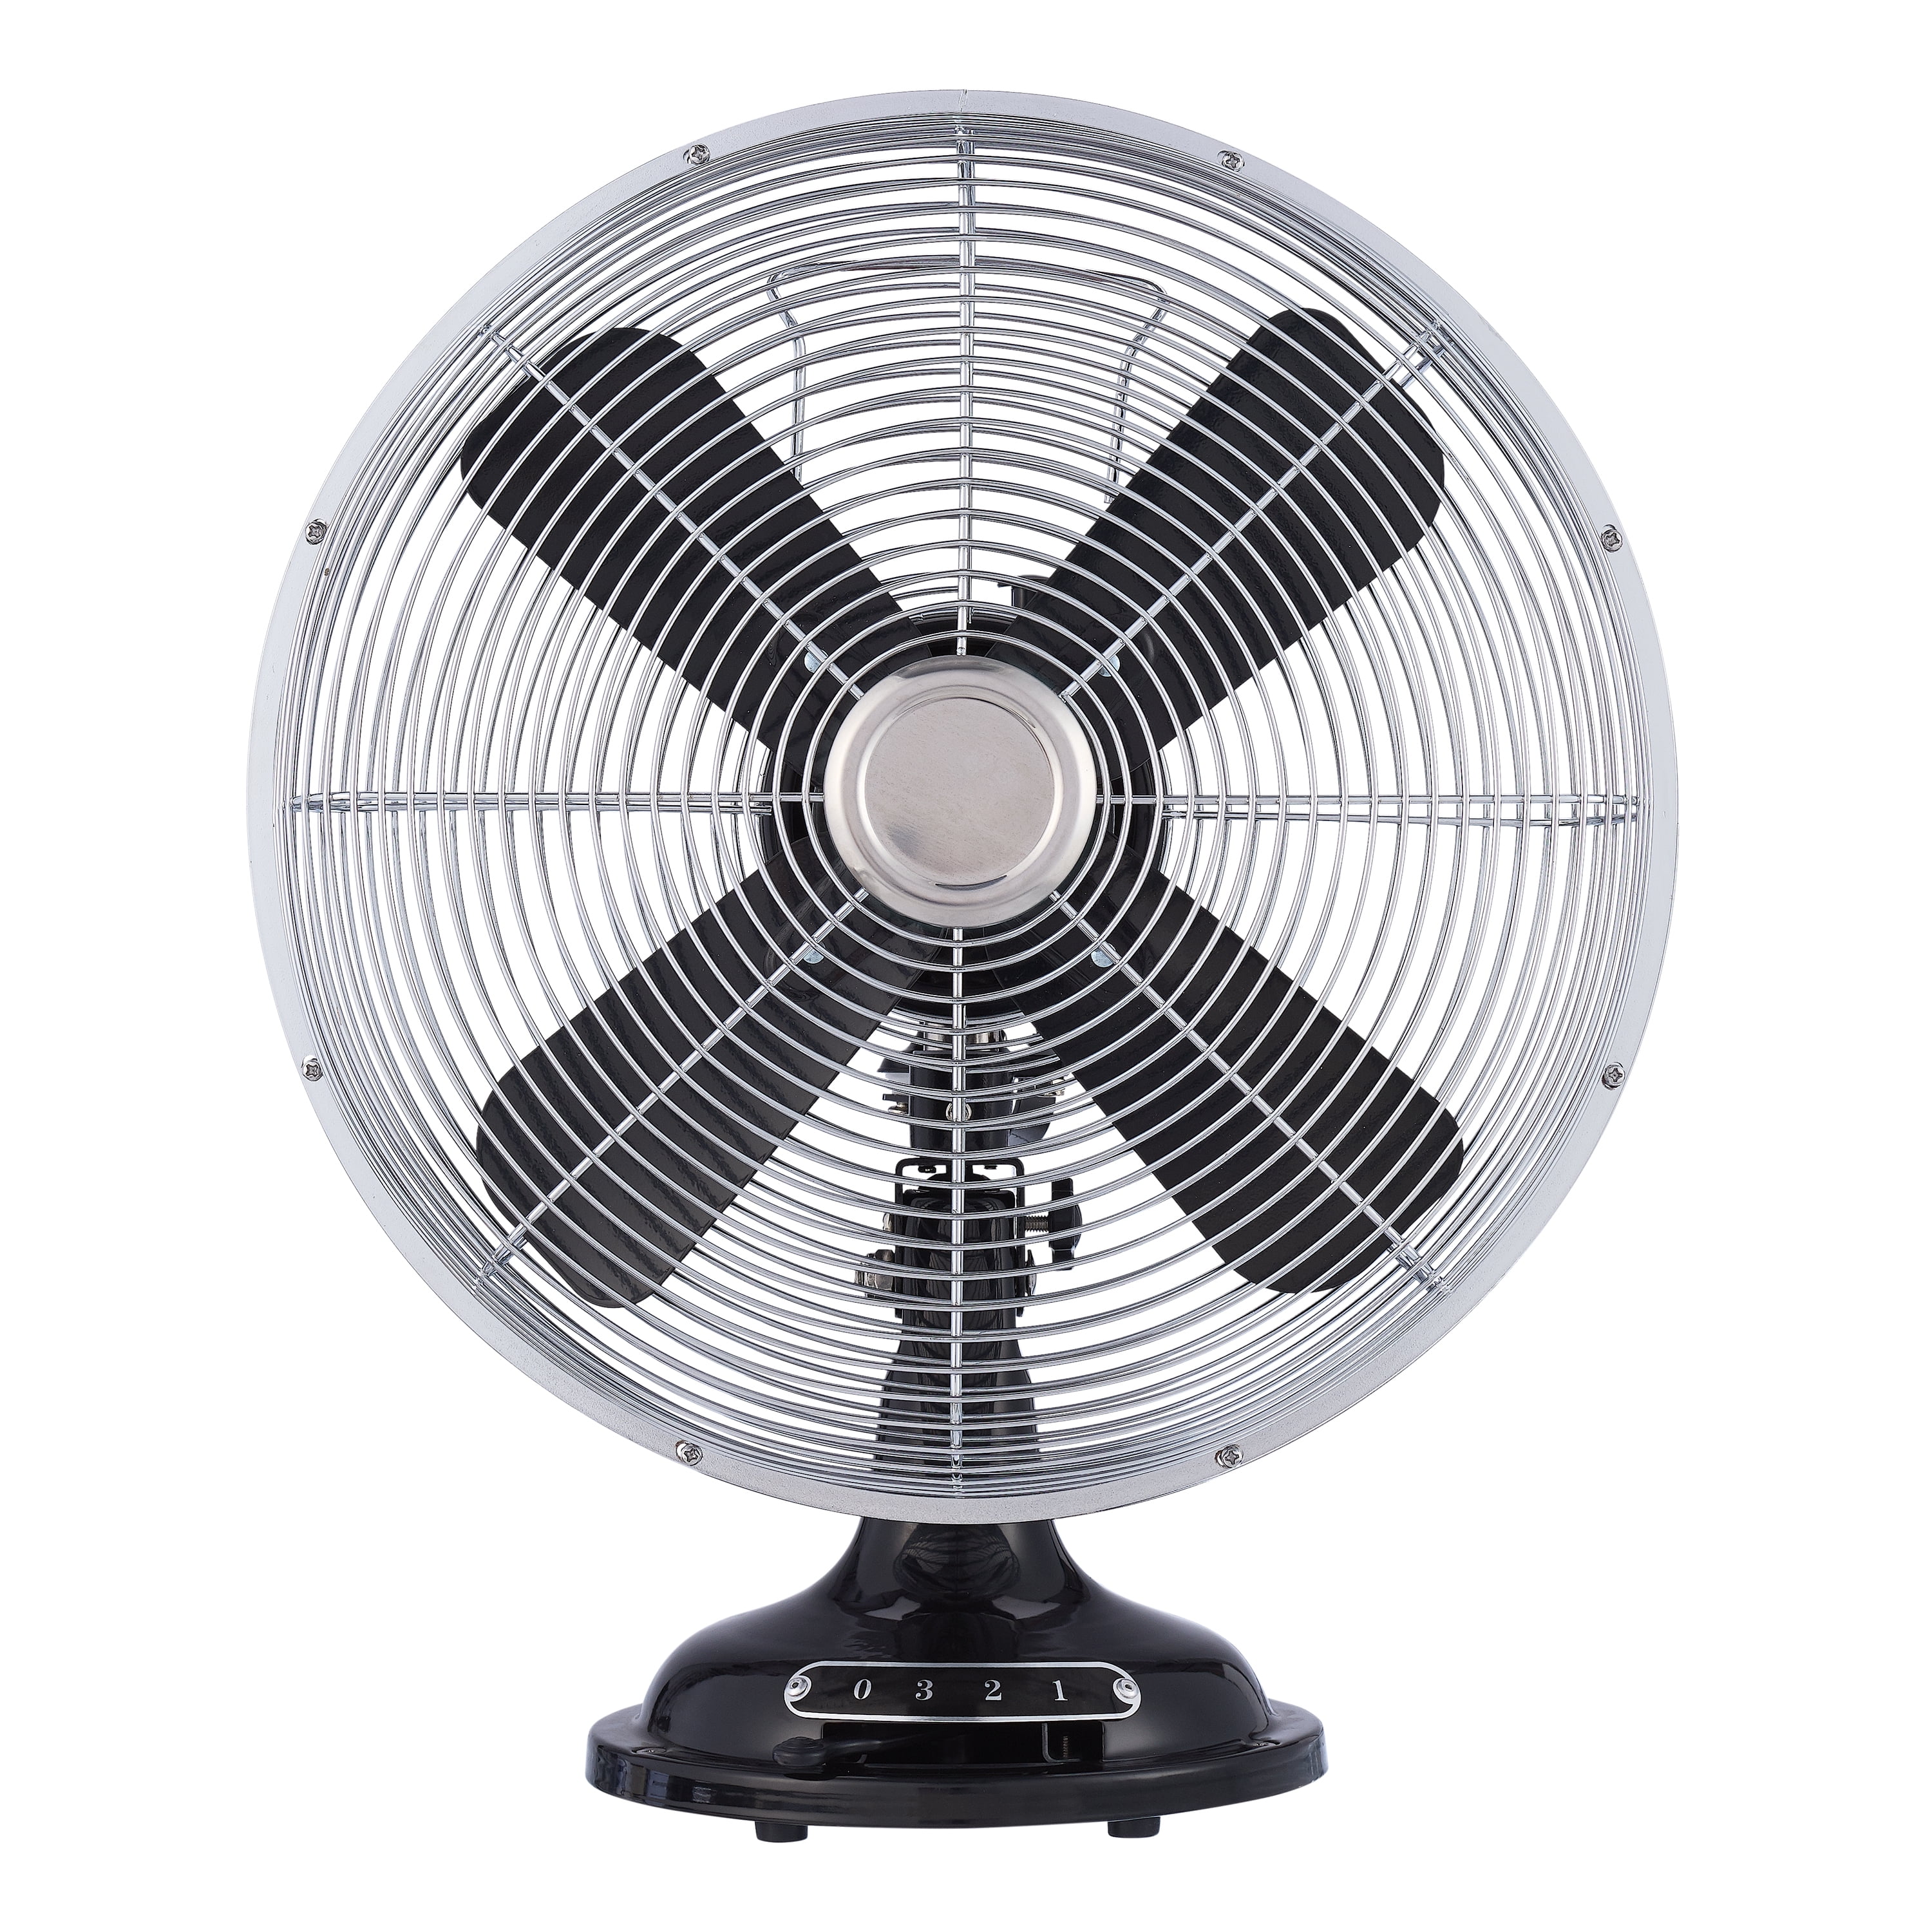 12" Better Homes & Gardens Retro 3-Speed Metal Tilted-Head Oscillation Table Fan (Various Colors) $15.20 + Free Shipping w/ Walmart+ or $35+